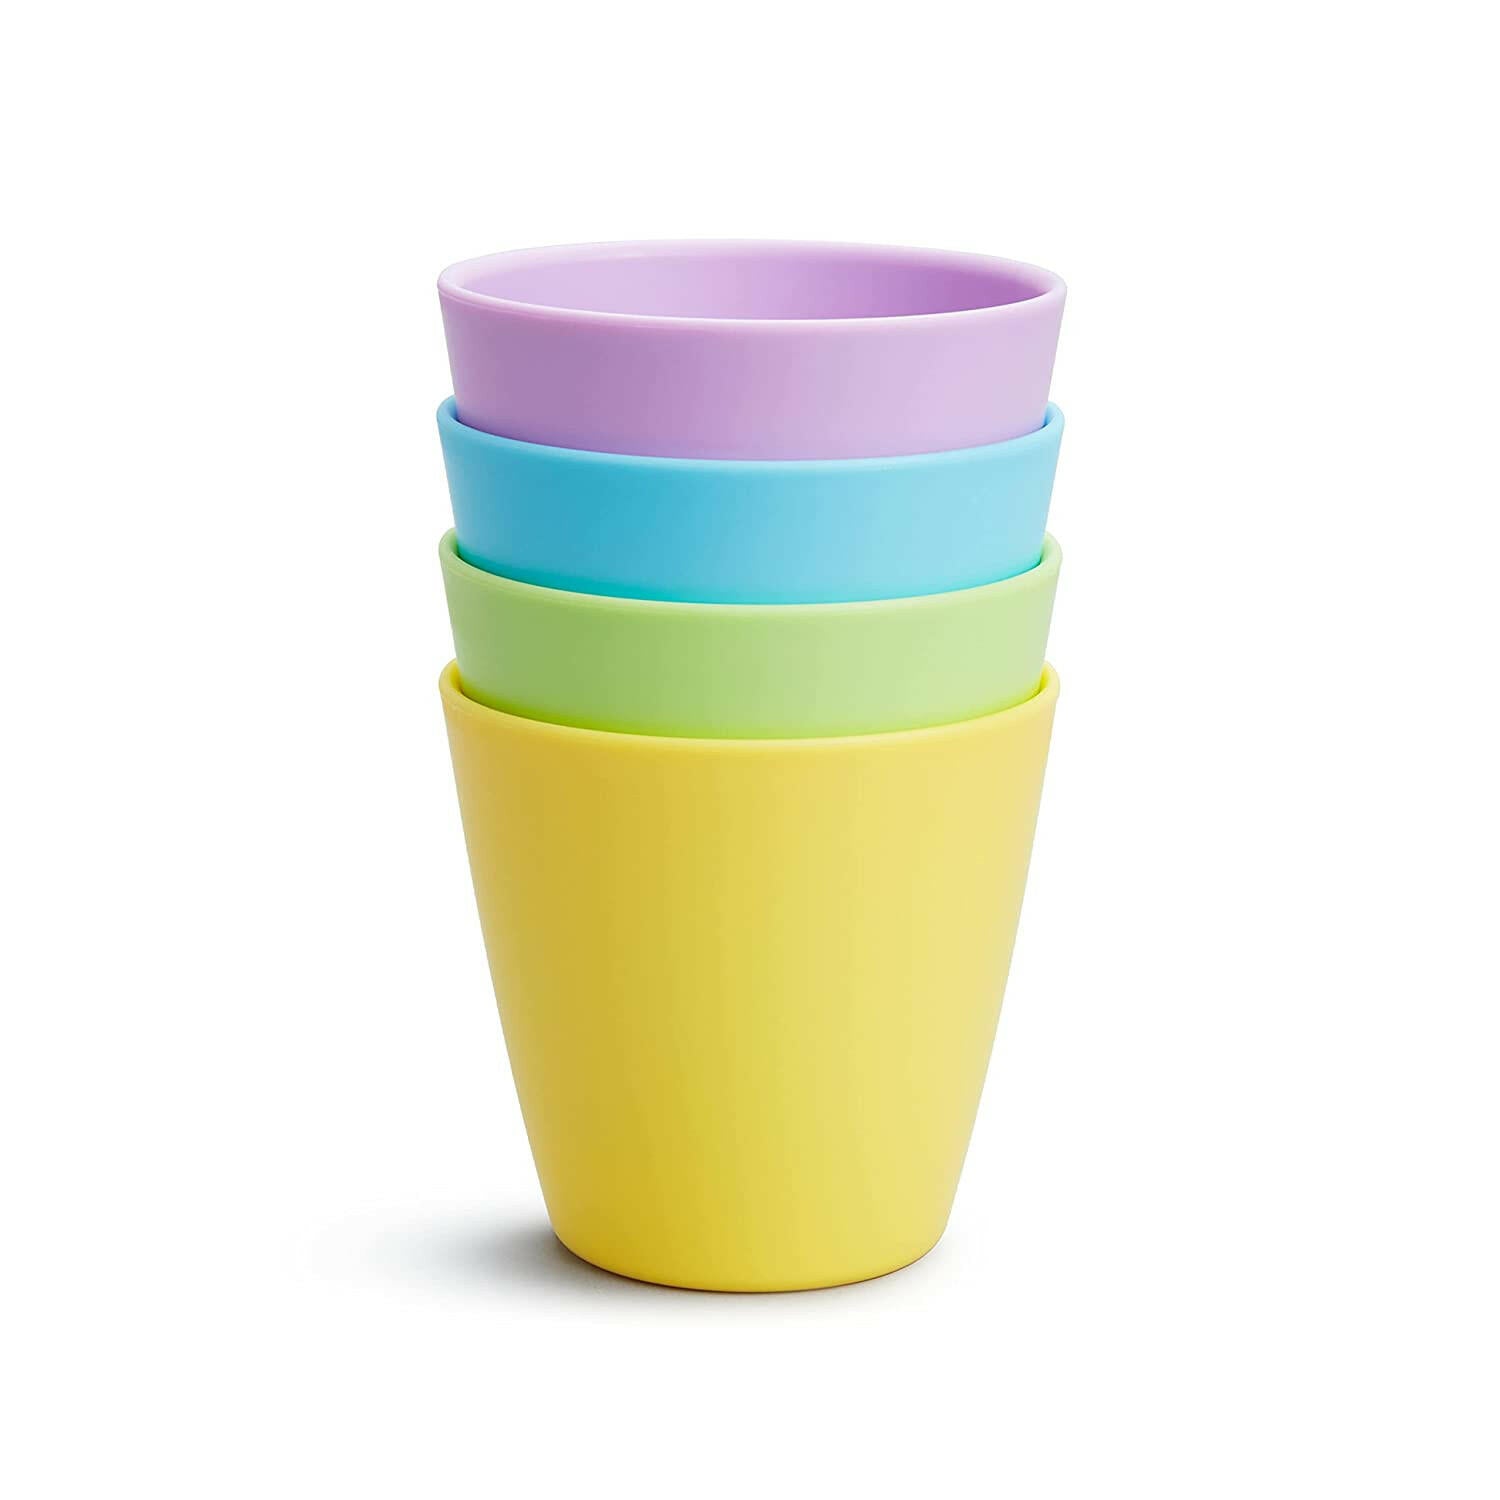 Munchkin Multi Open Training Toddler Cups, 8 Ounce, 4 Pack.